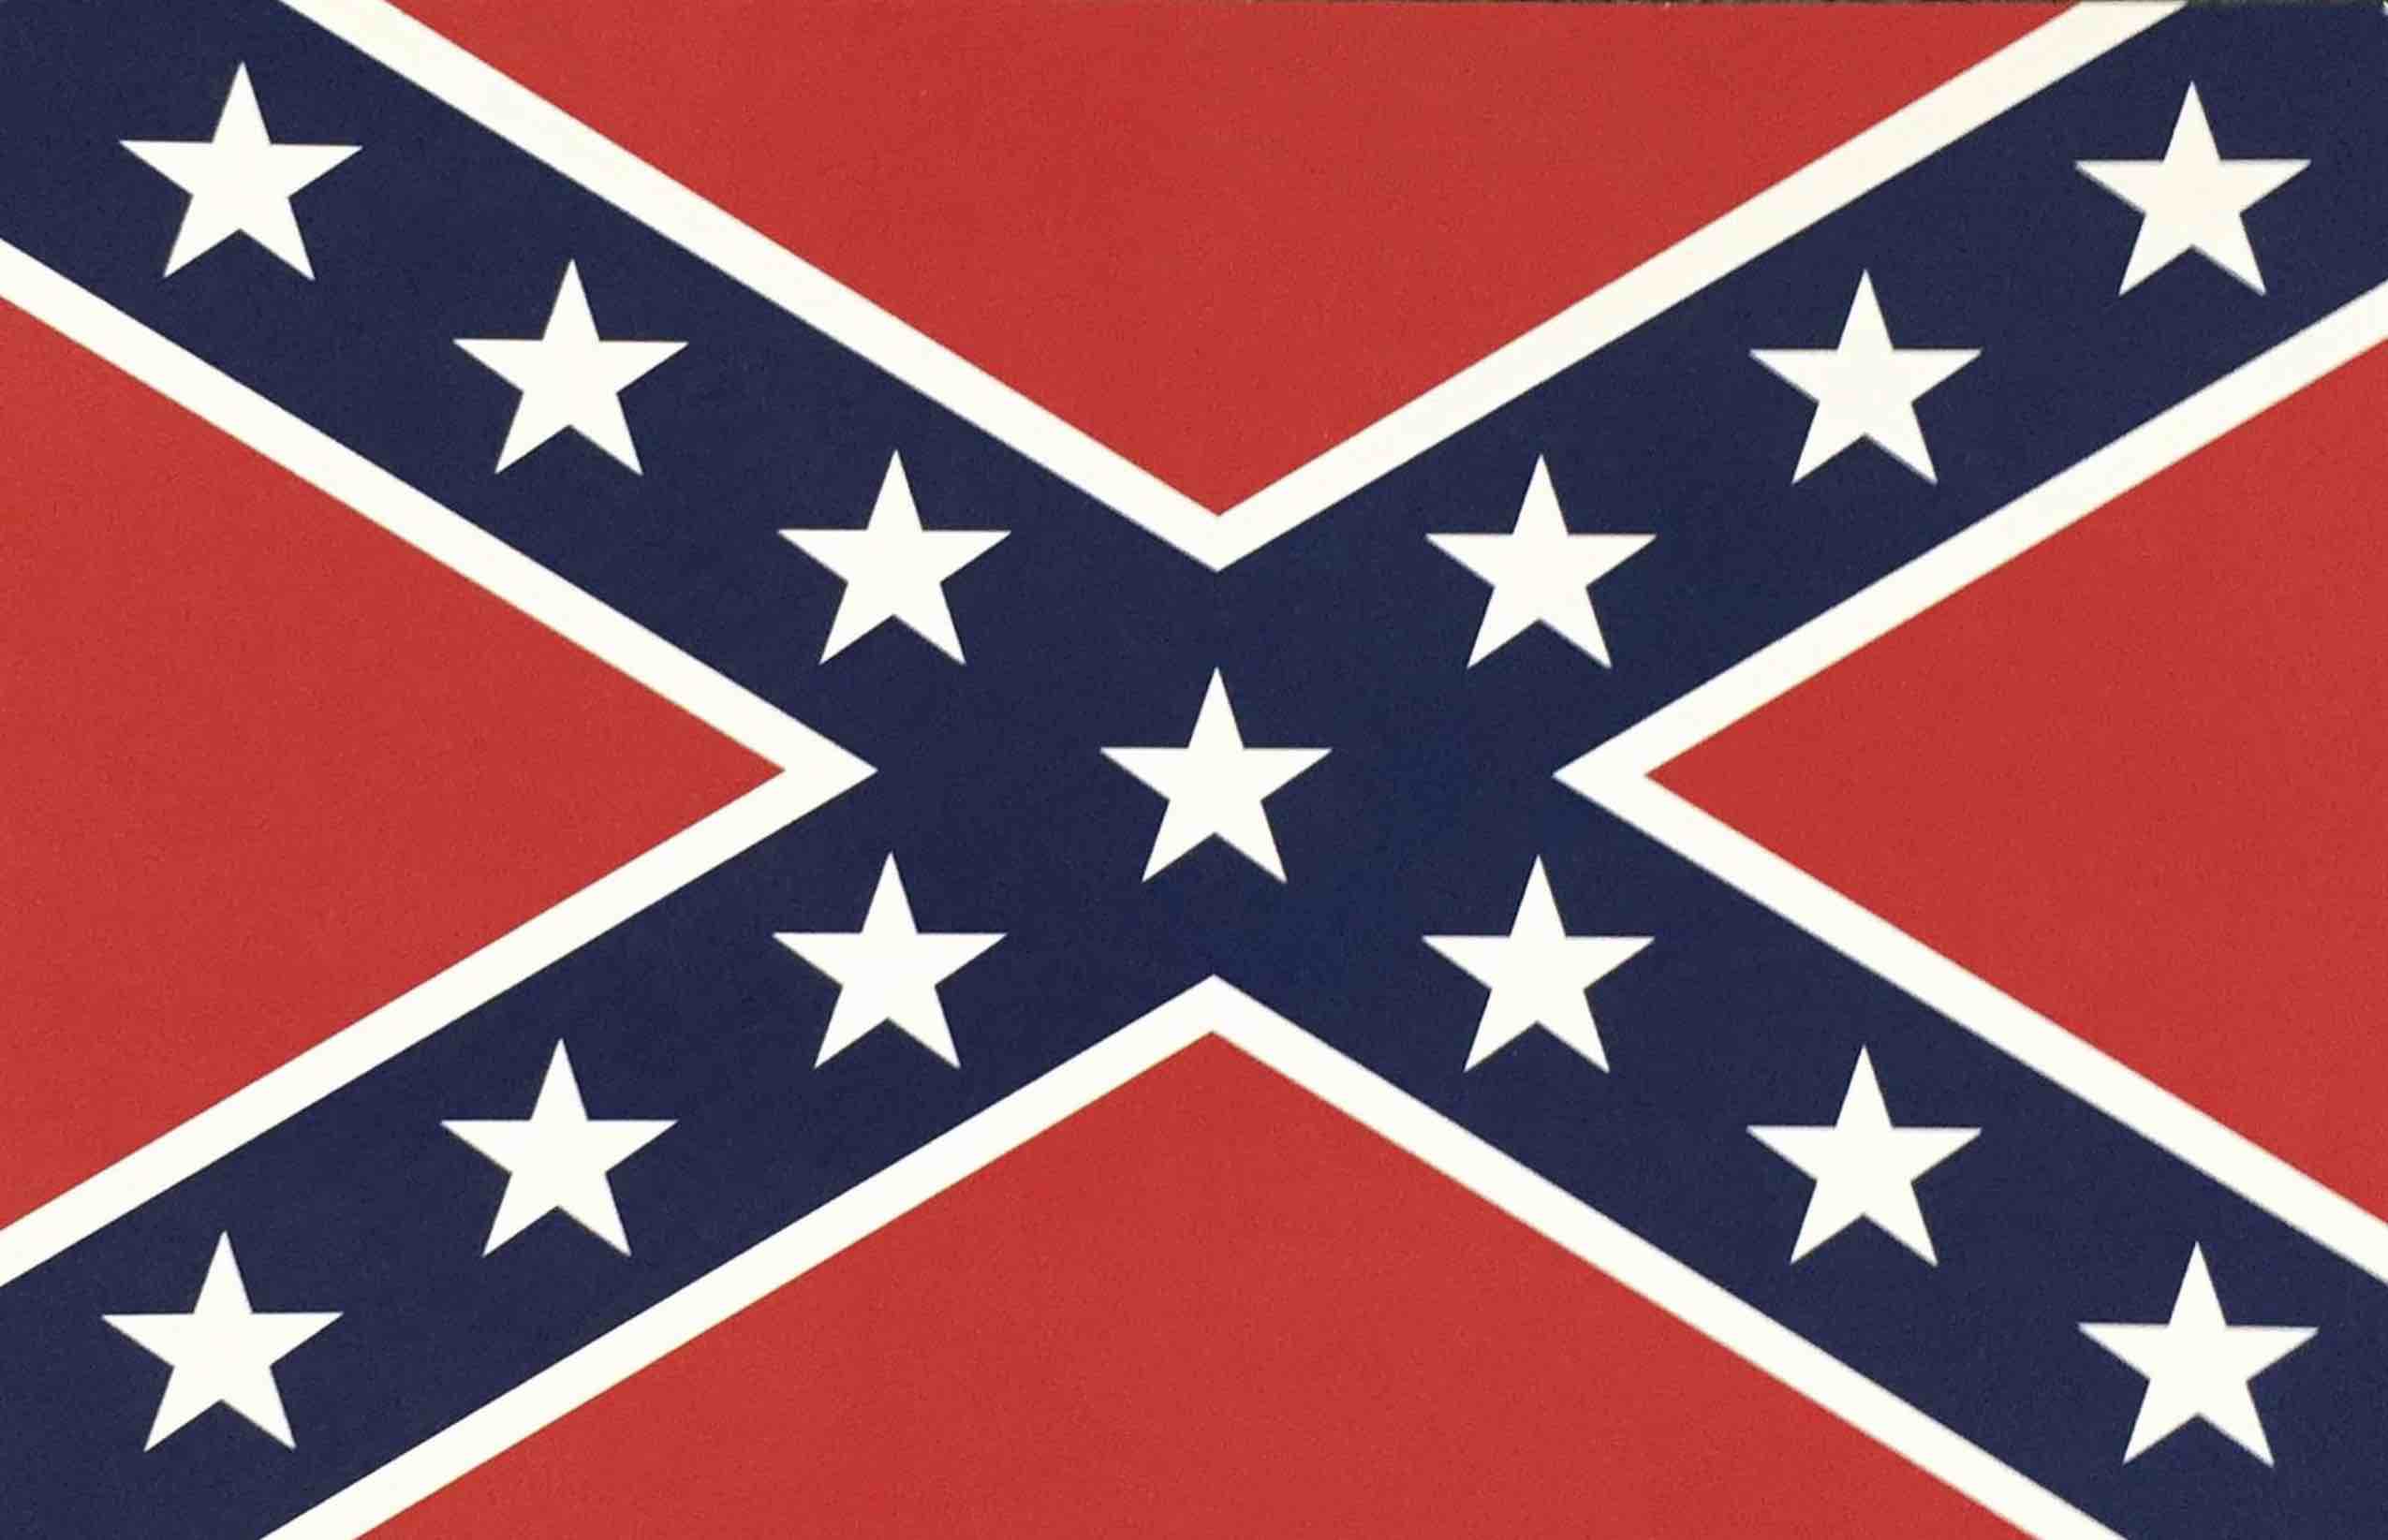 Confederate battle flag, which
has a red background, blue X, and 13 stars arranged along the X